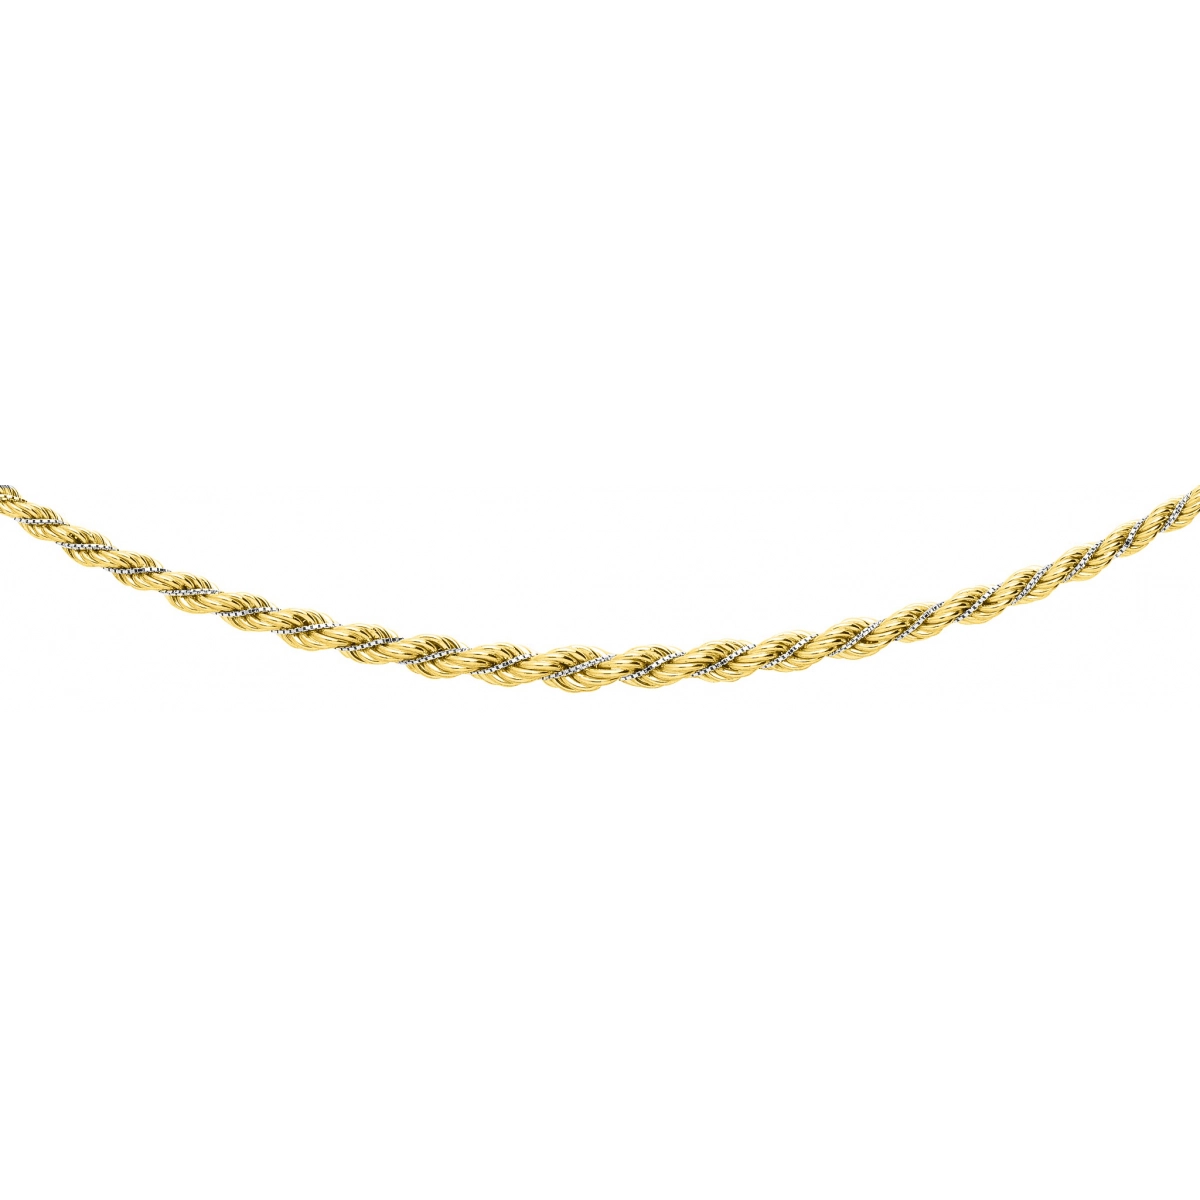 Necklace 'rope chain' graduated 18K 2TG Lua Blanca  L067.42